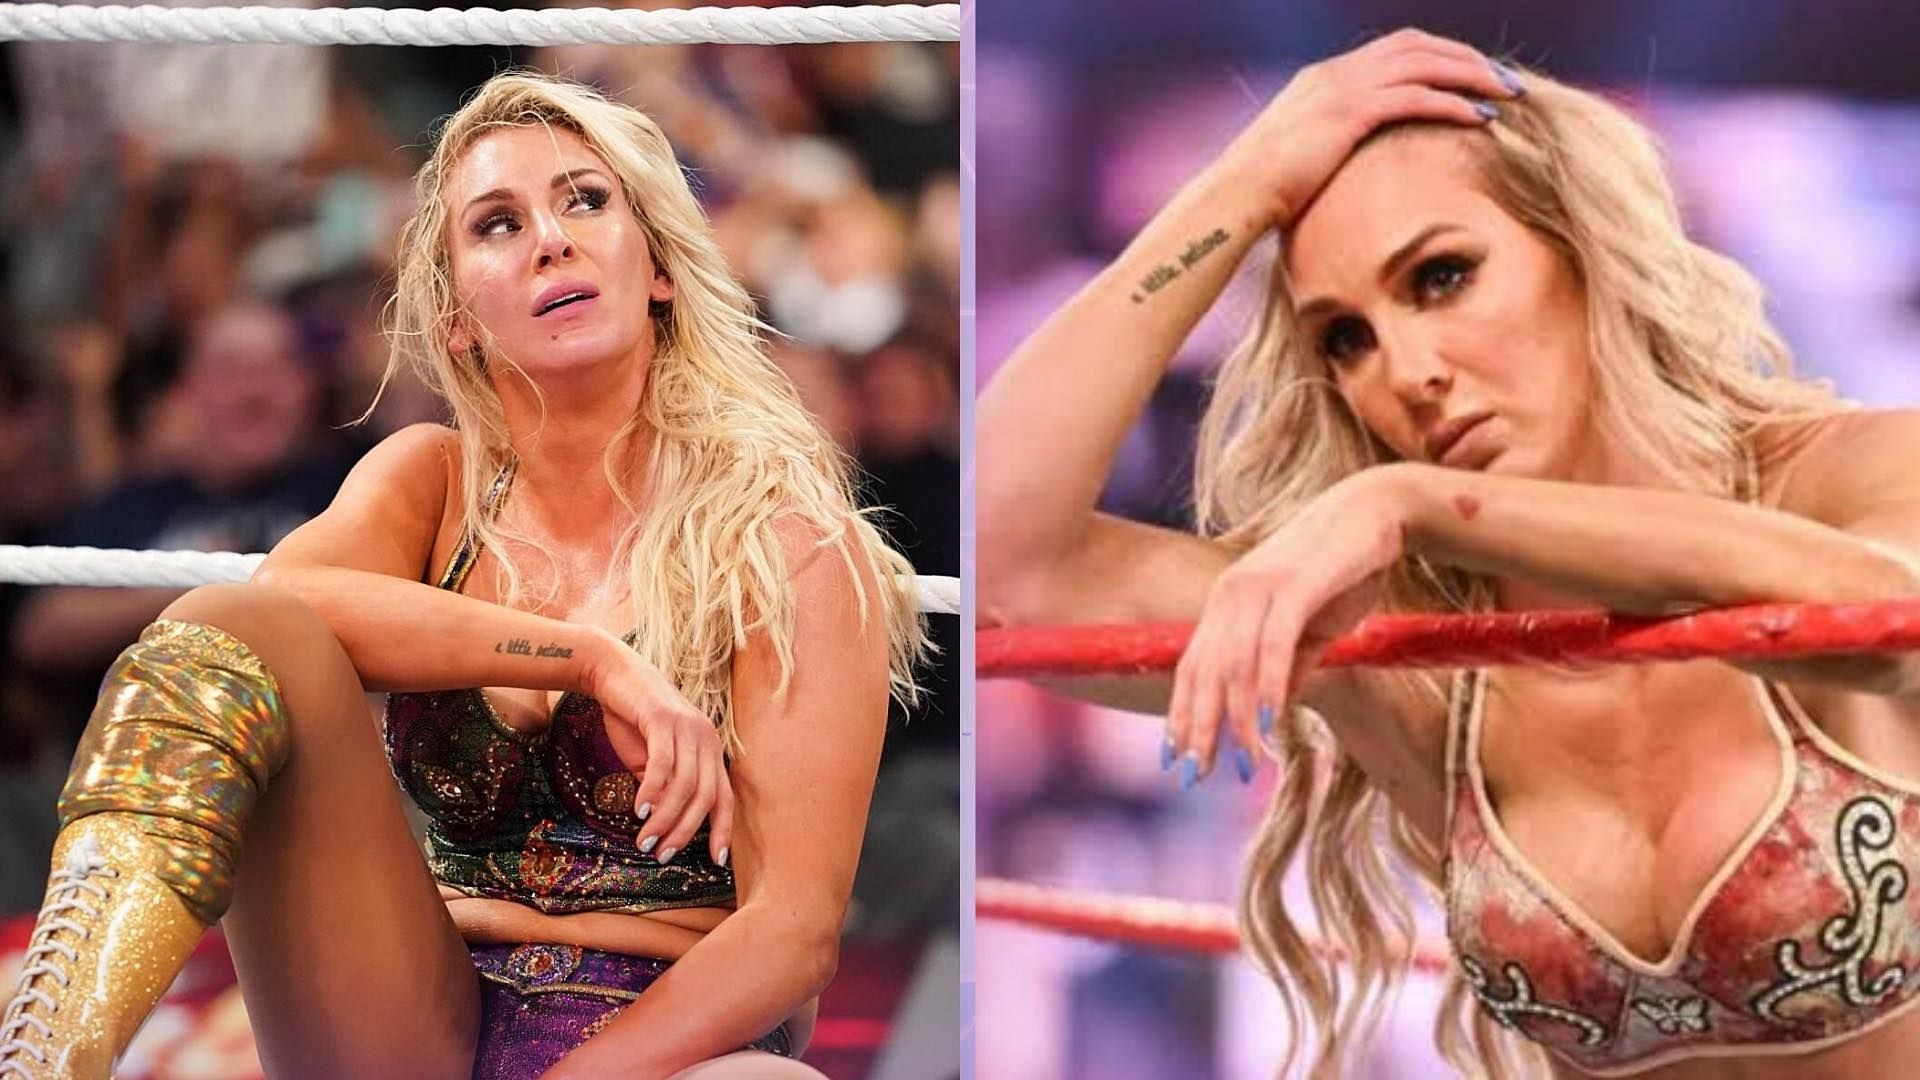 Charlotte Flair suffered a multiple injuries to her knee on WWE SmackDown two weeks ago.